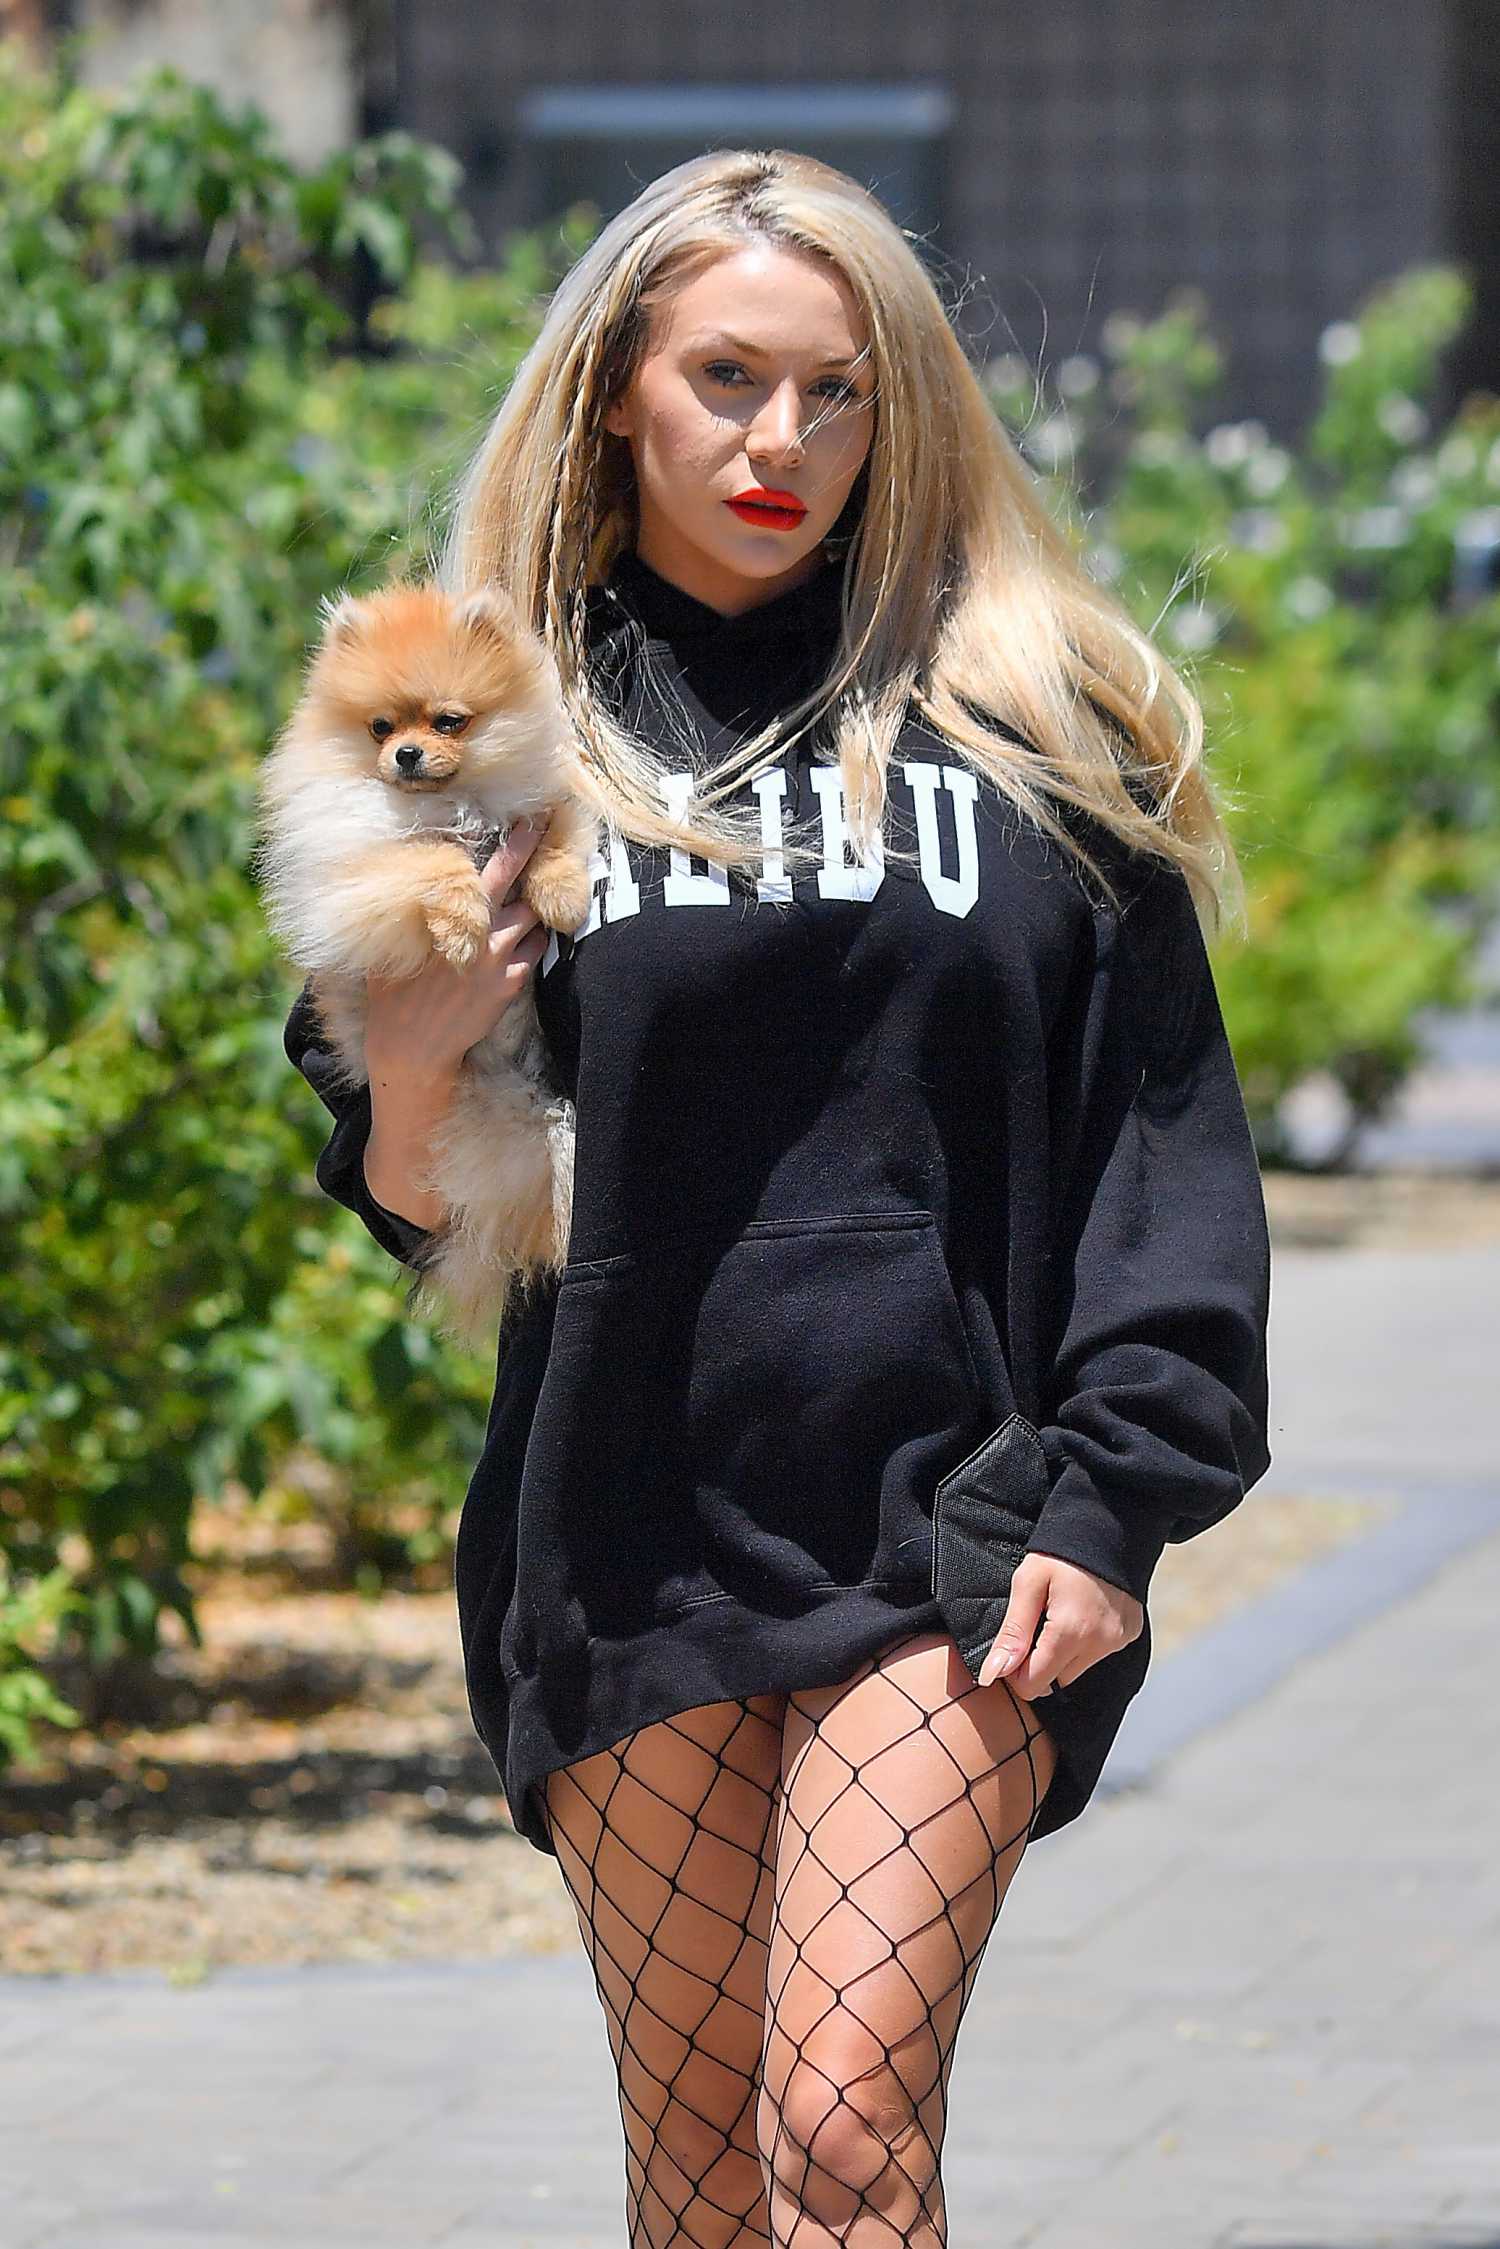 Courtney Stodden in a Black Hoodie Was Seen Out with Her Boyfriend ...